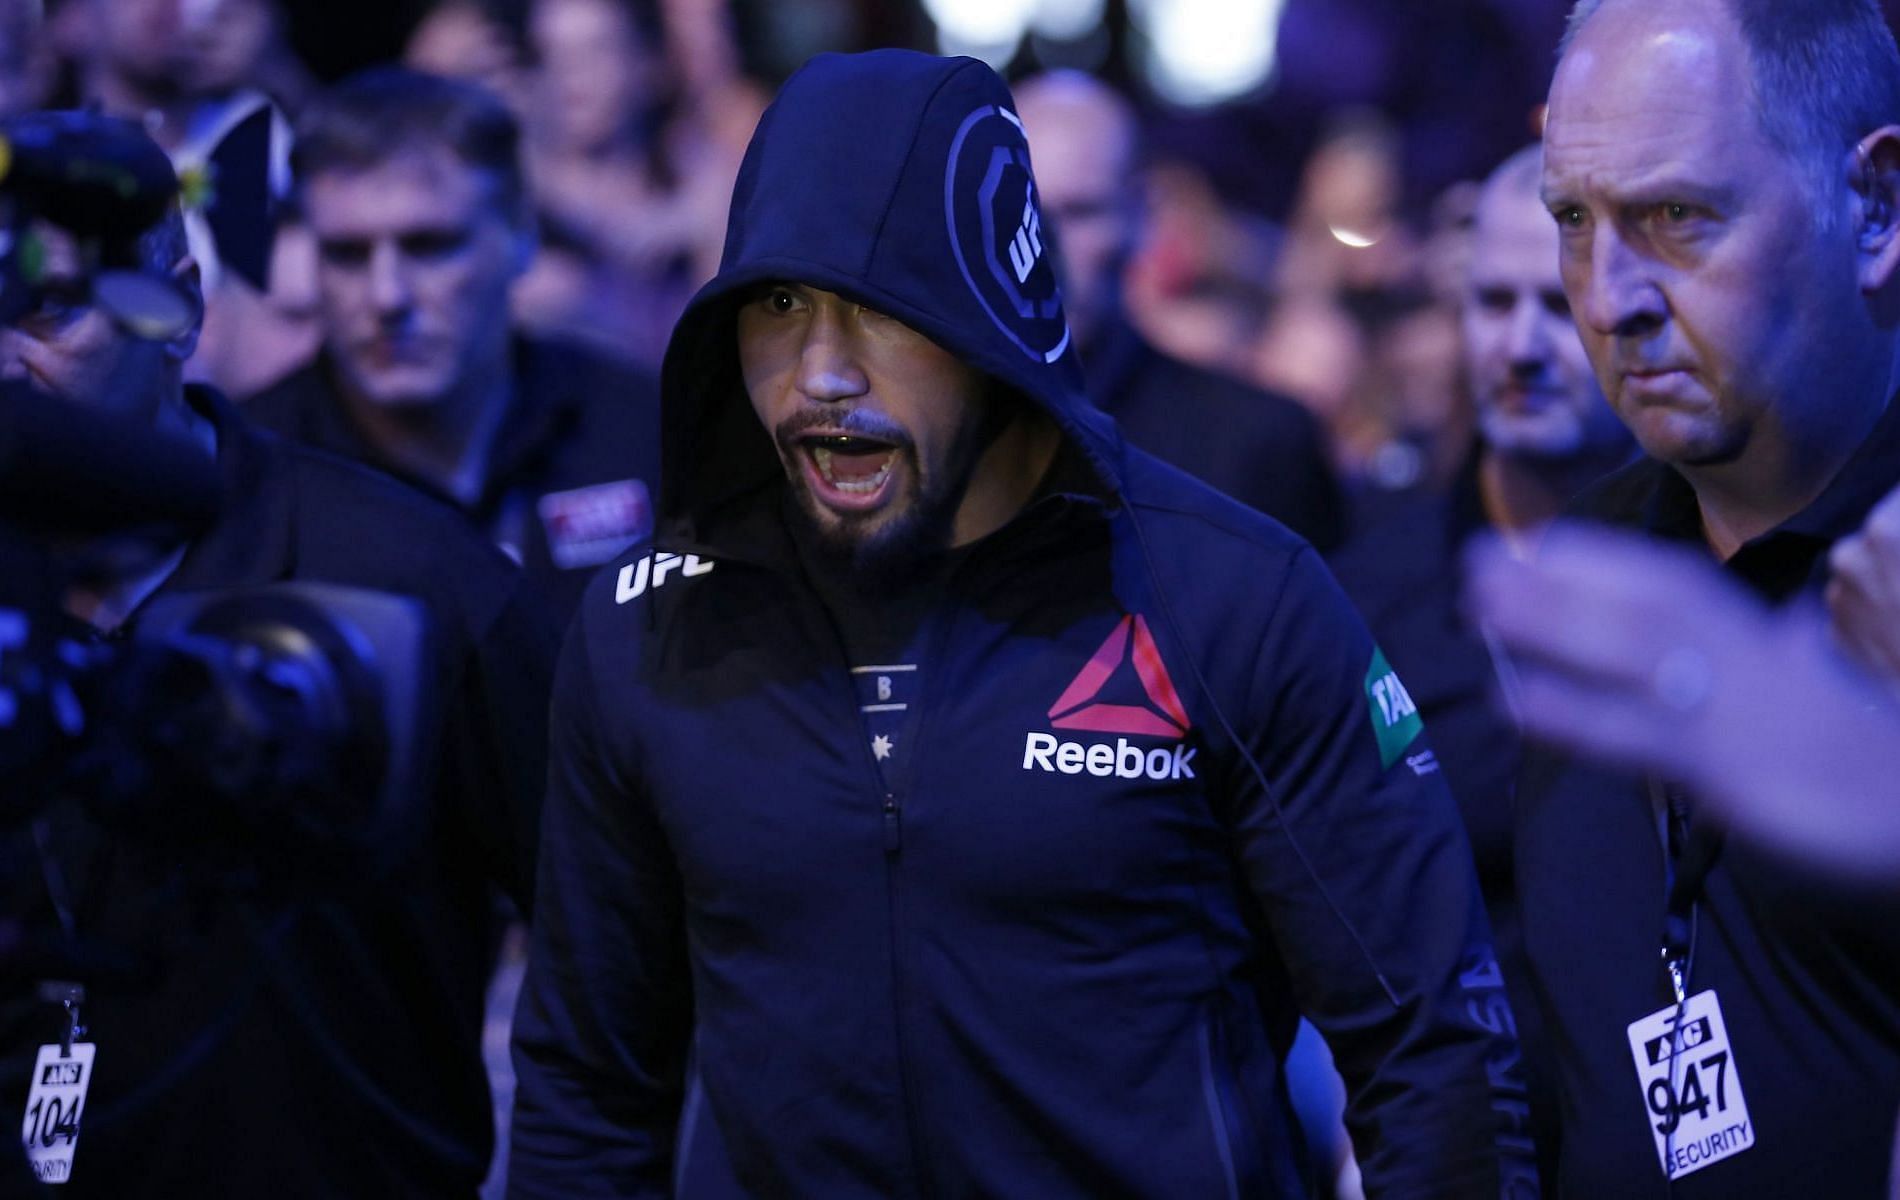 Can Robert Whittaker make the adjustments he needs in order to defeat Israel Adesanya at UFC 271?